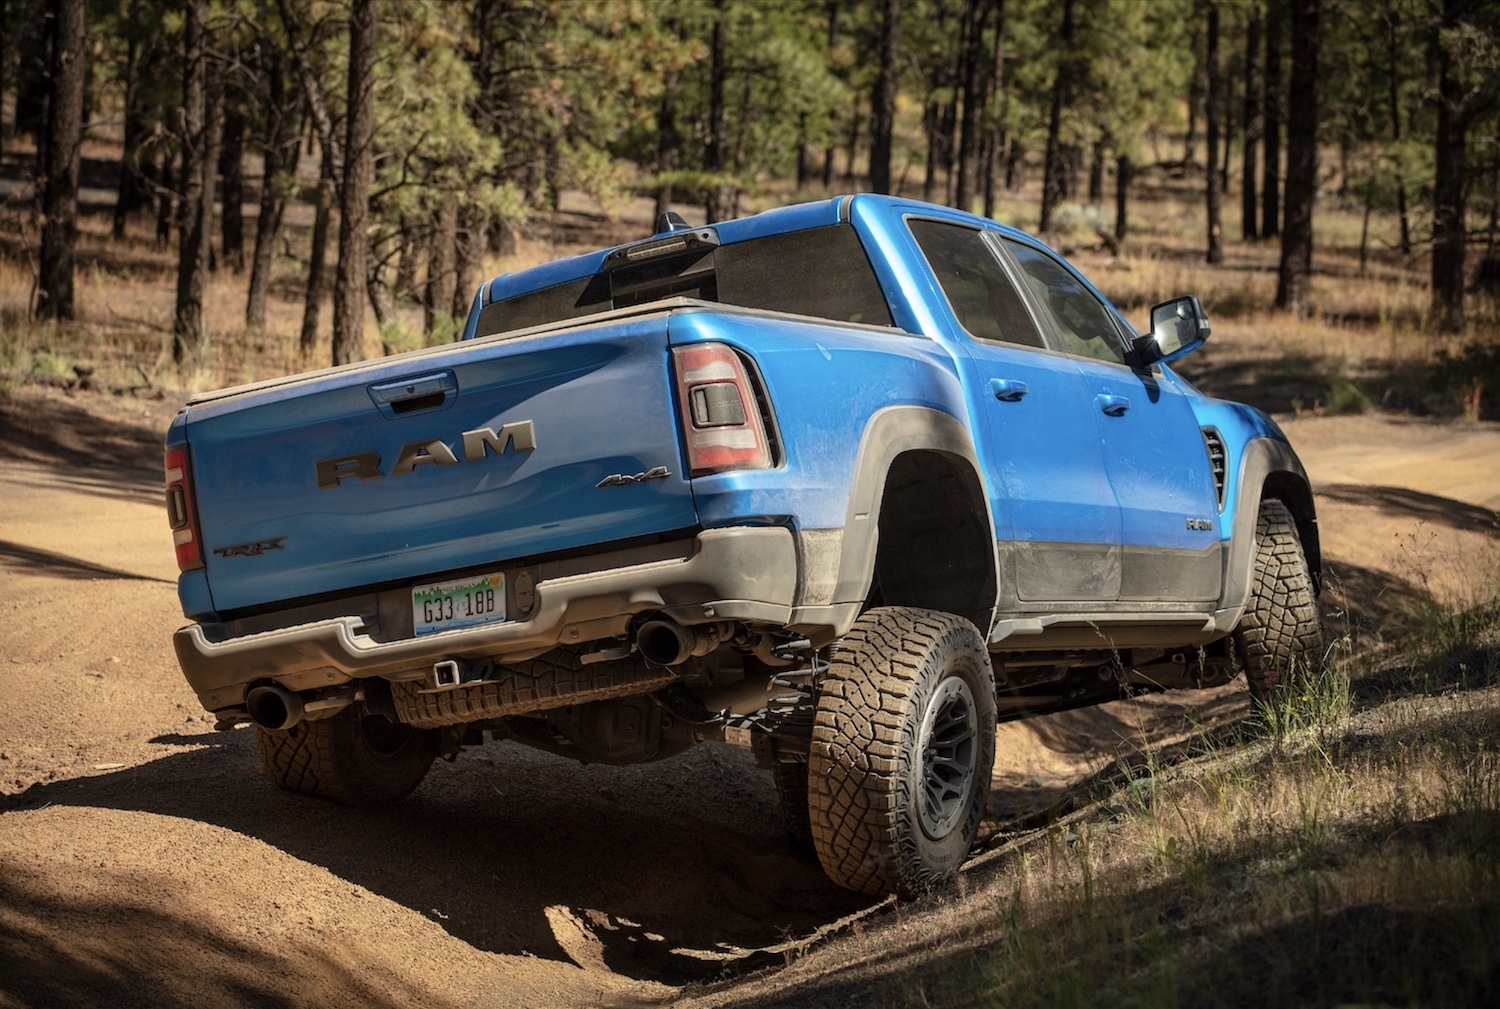 Ram 1500 TRX showing off its rear coil spring suspension on a 4x4 trail.